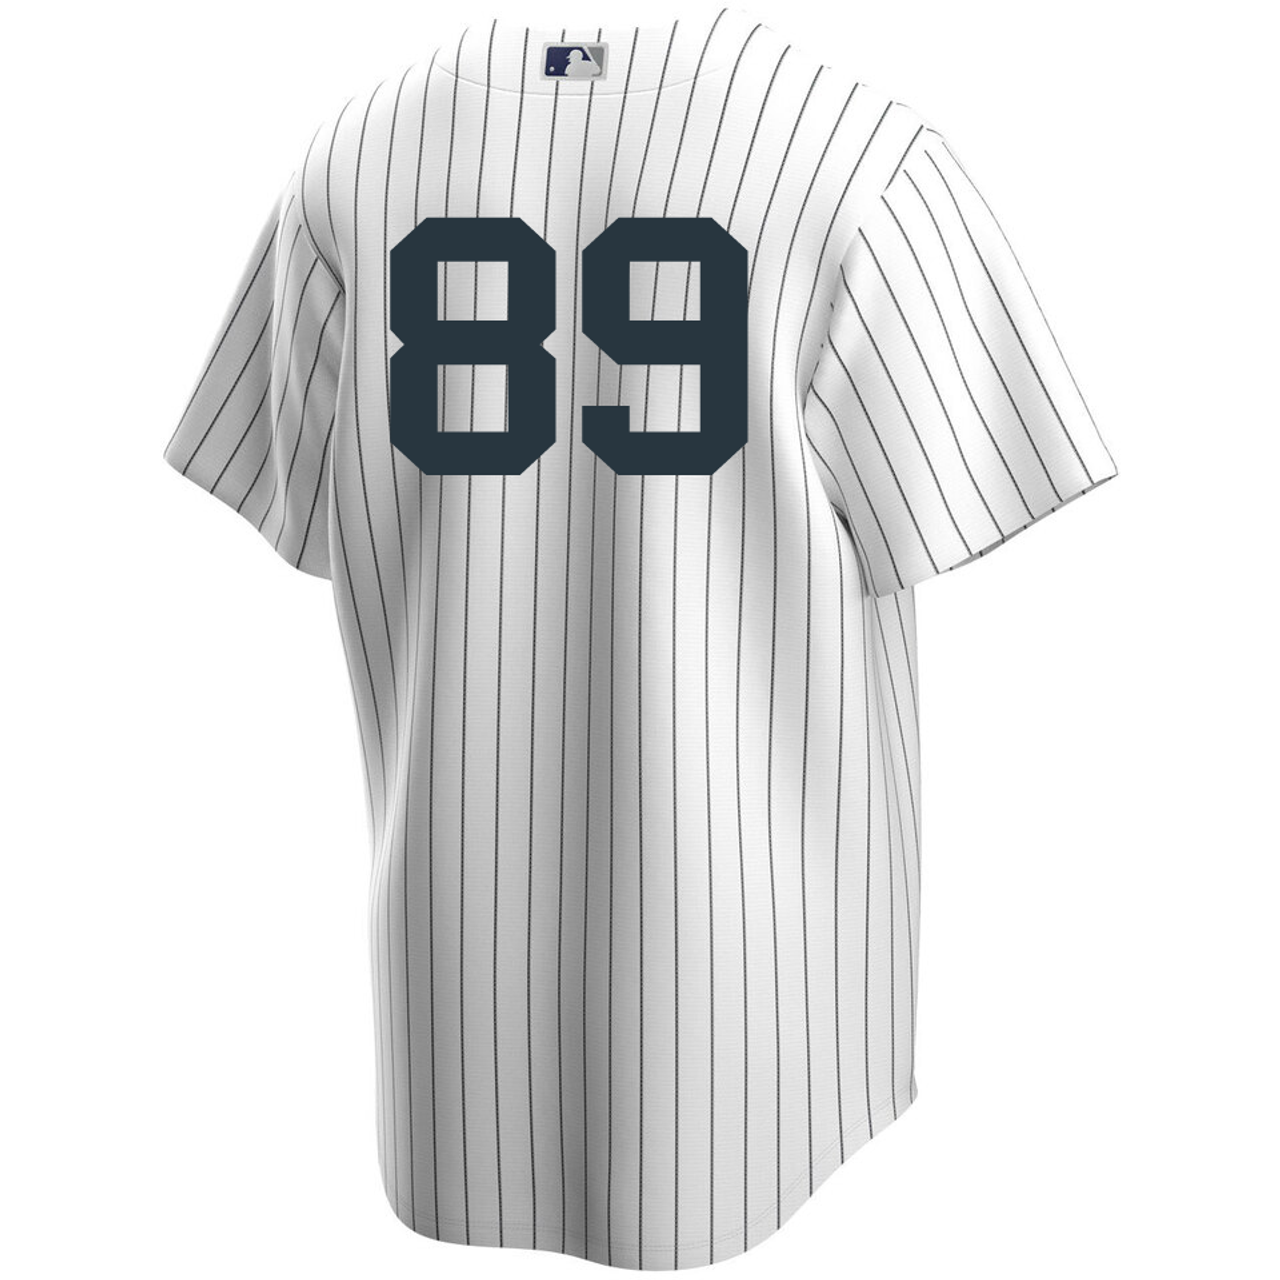 The Martian Jasson Dominguez Youth Jersey - NY Yankees Replica